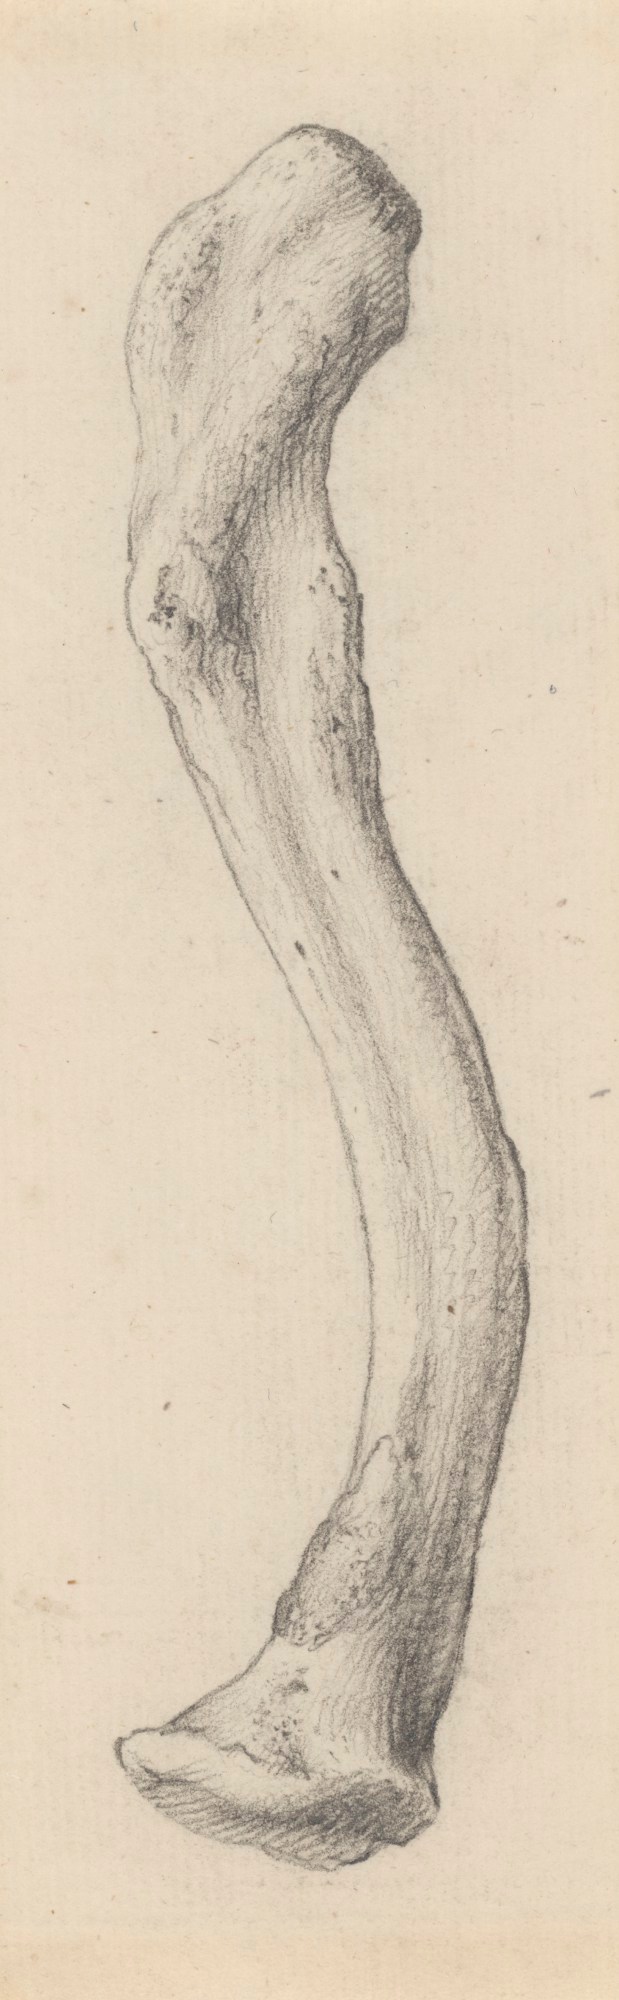 Drawing of the radius and ulna bones fused together, for Cheselden's  Osteographia, Works of Art, RA Collection